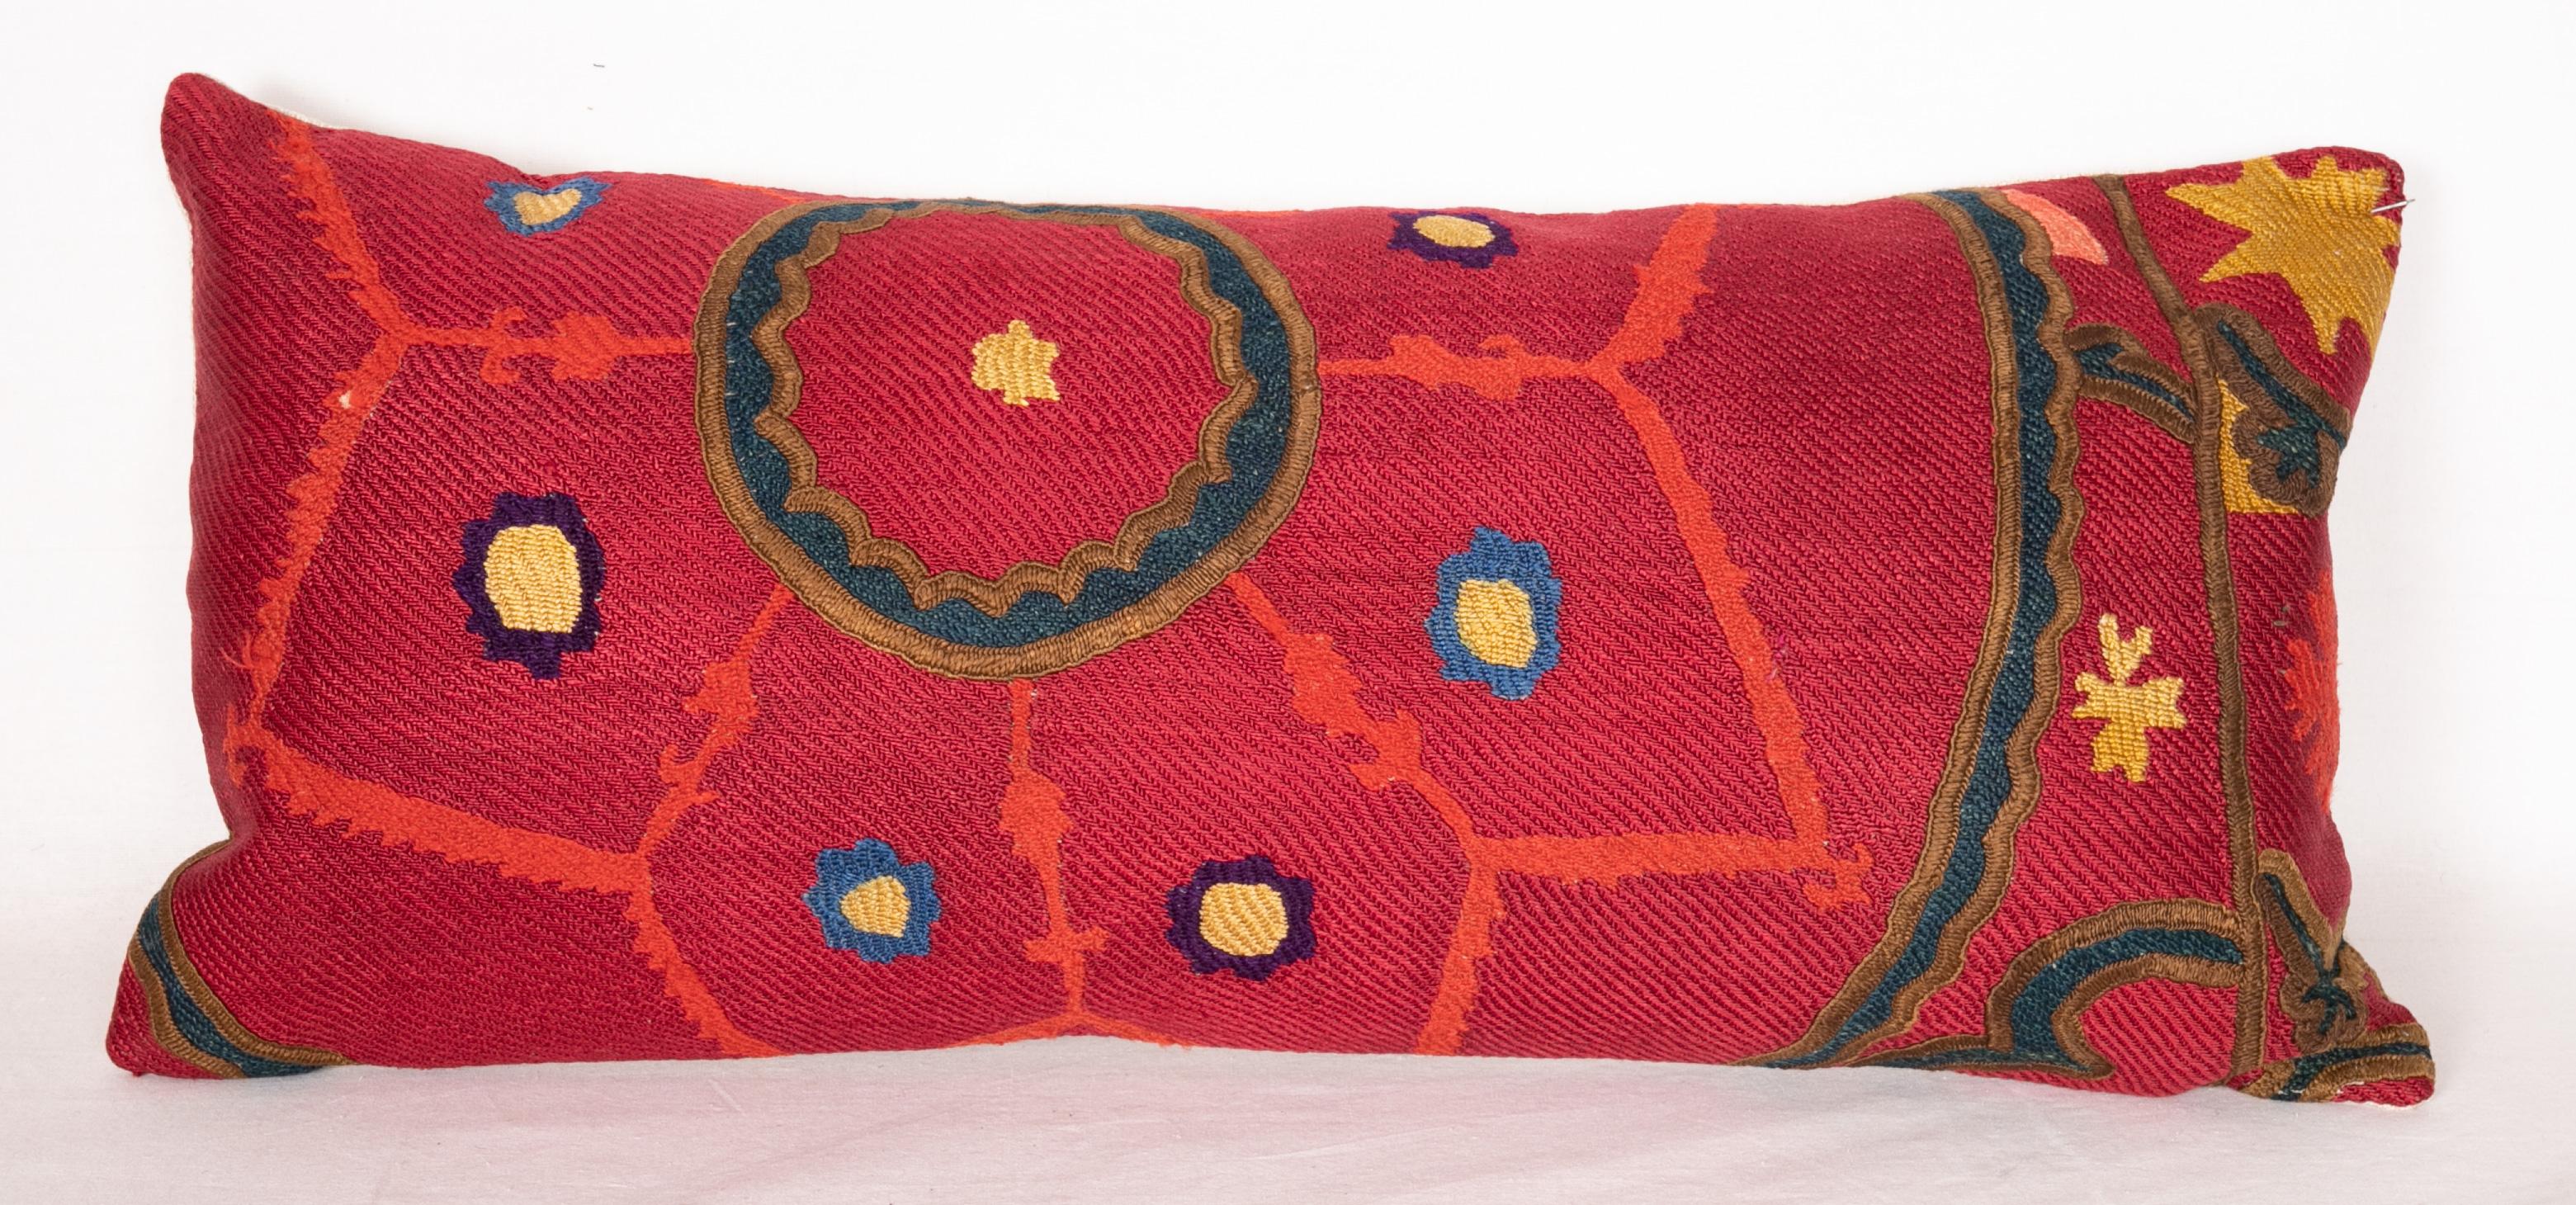 Antique Suzani Pillows Made from a 19th Century Tashkent Suzani In Good Condition For Sale In Istanbul, TR